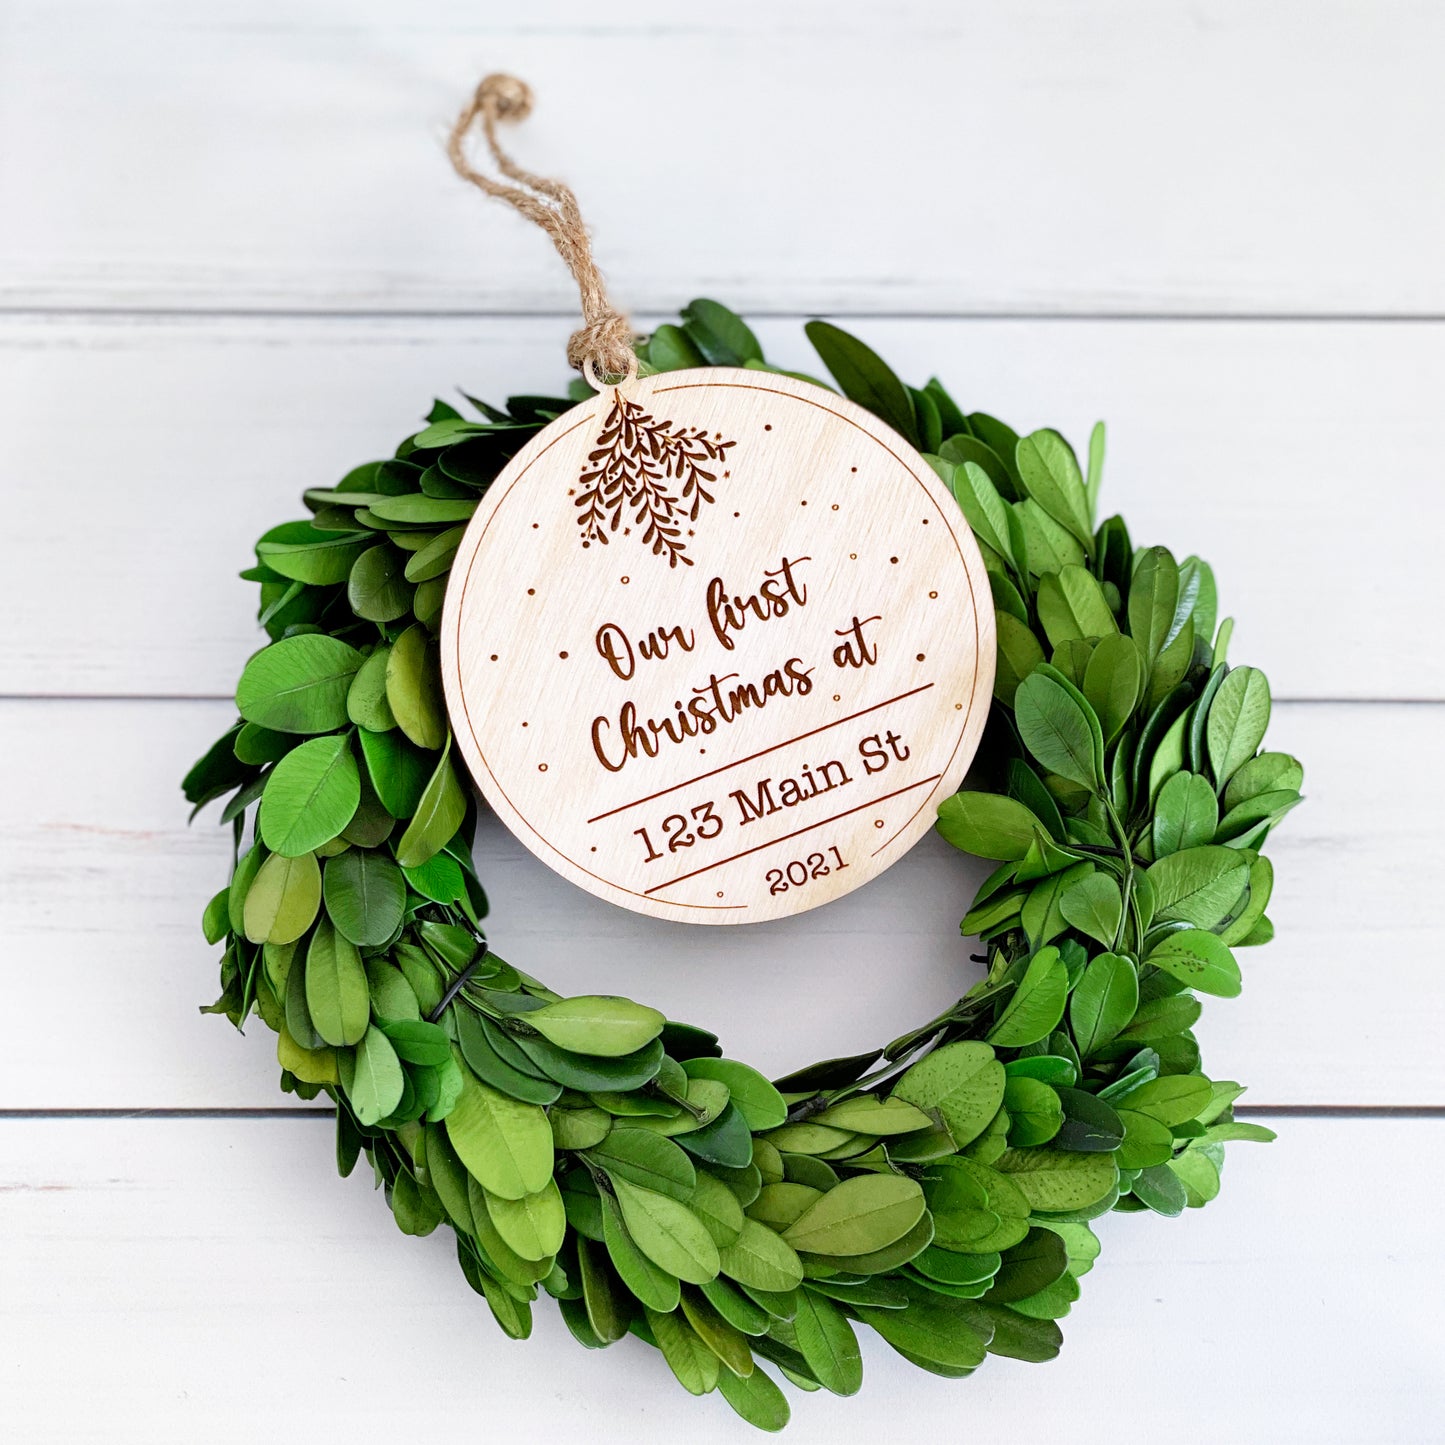 Our first Christmas engraved keepsake wooden ornament for Couples, customizable with names and address